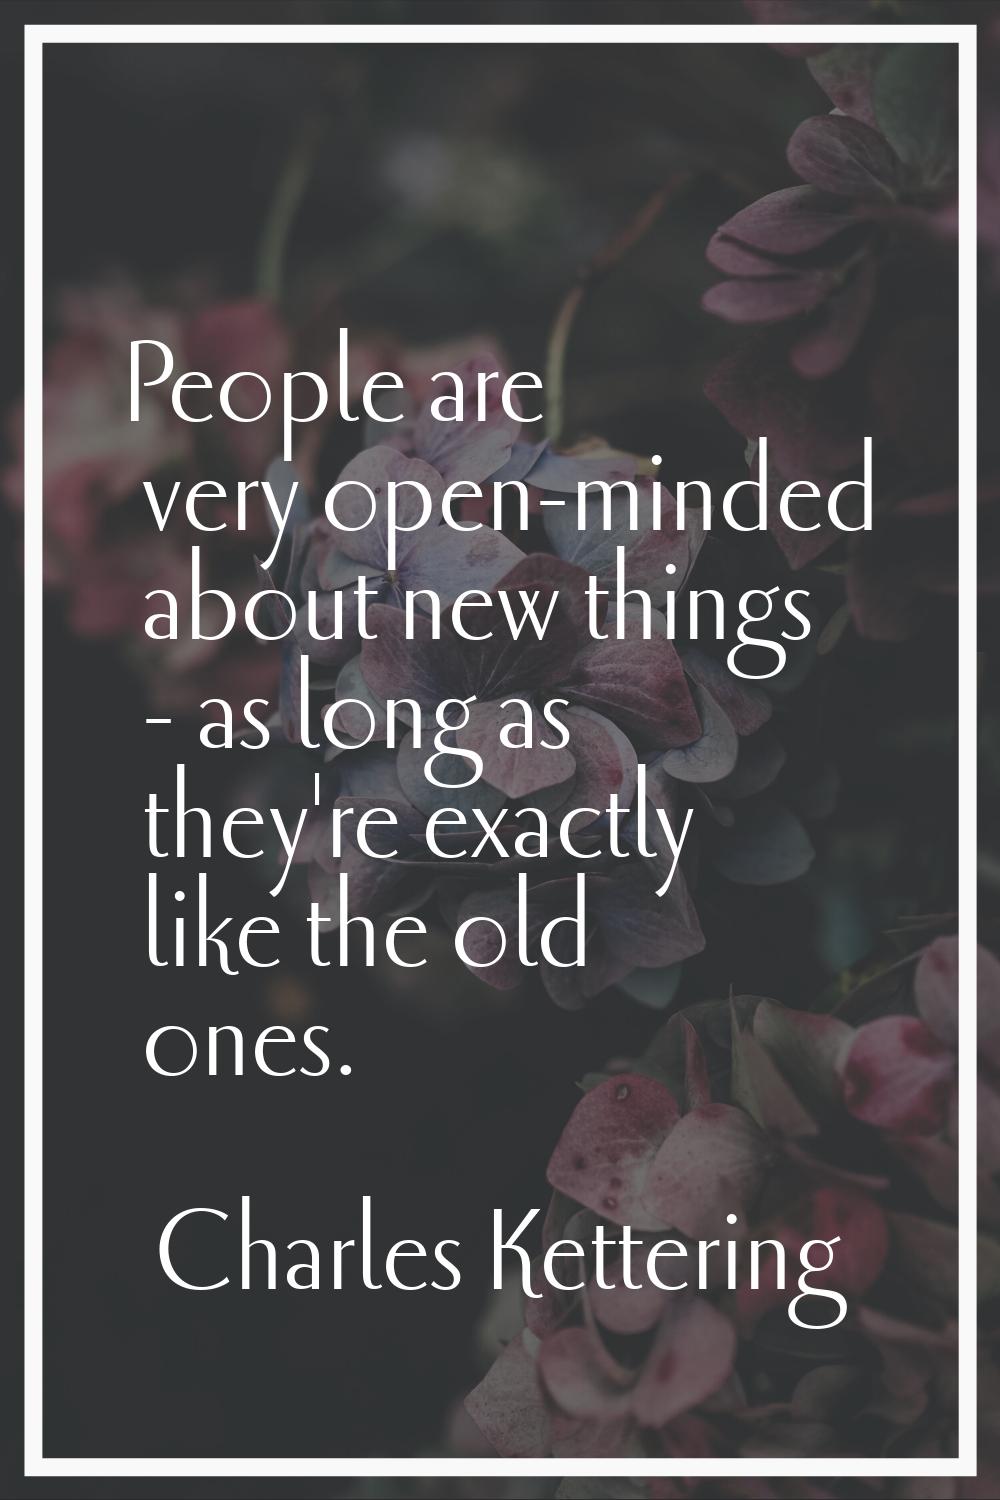 People are very open-minded about new things - as long as they're exactly like the old ones.